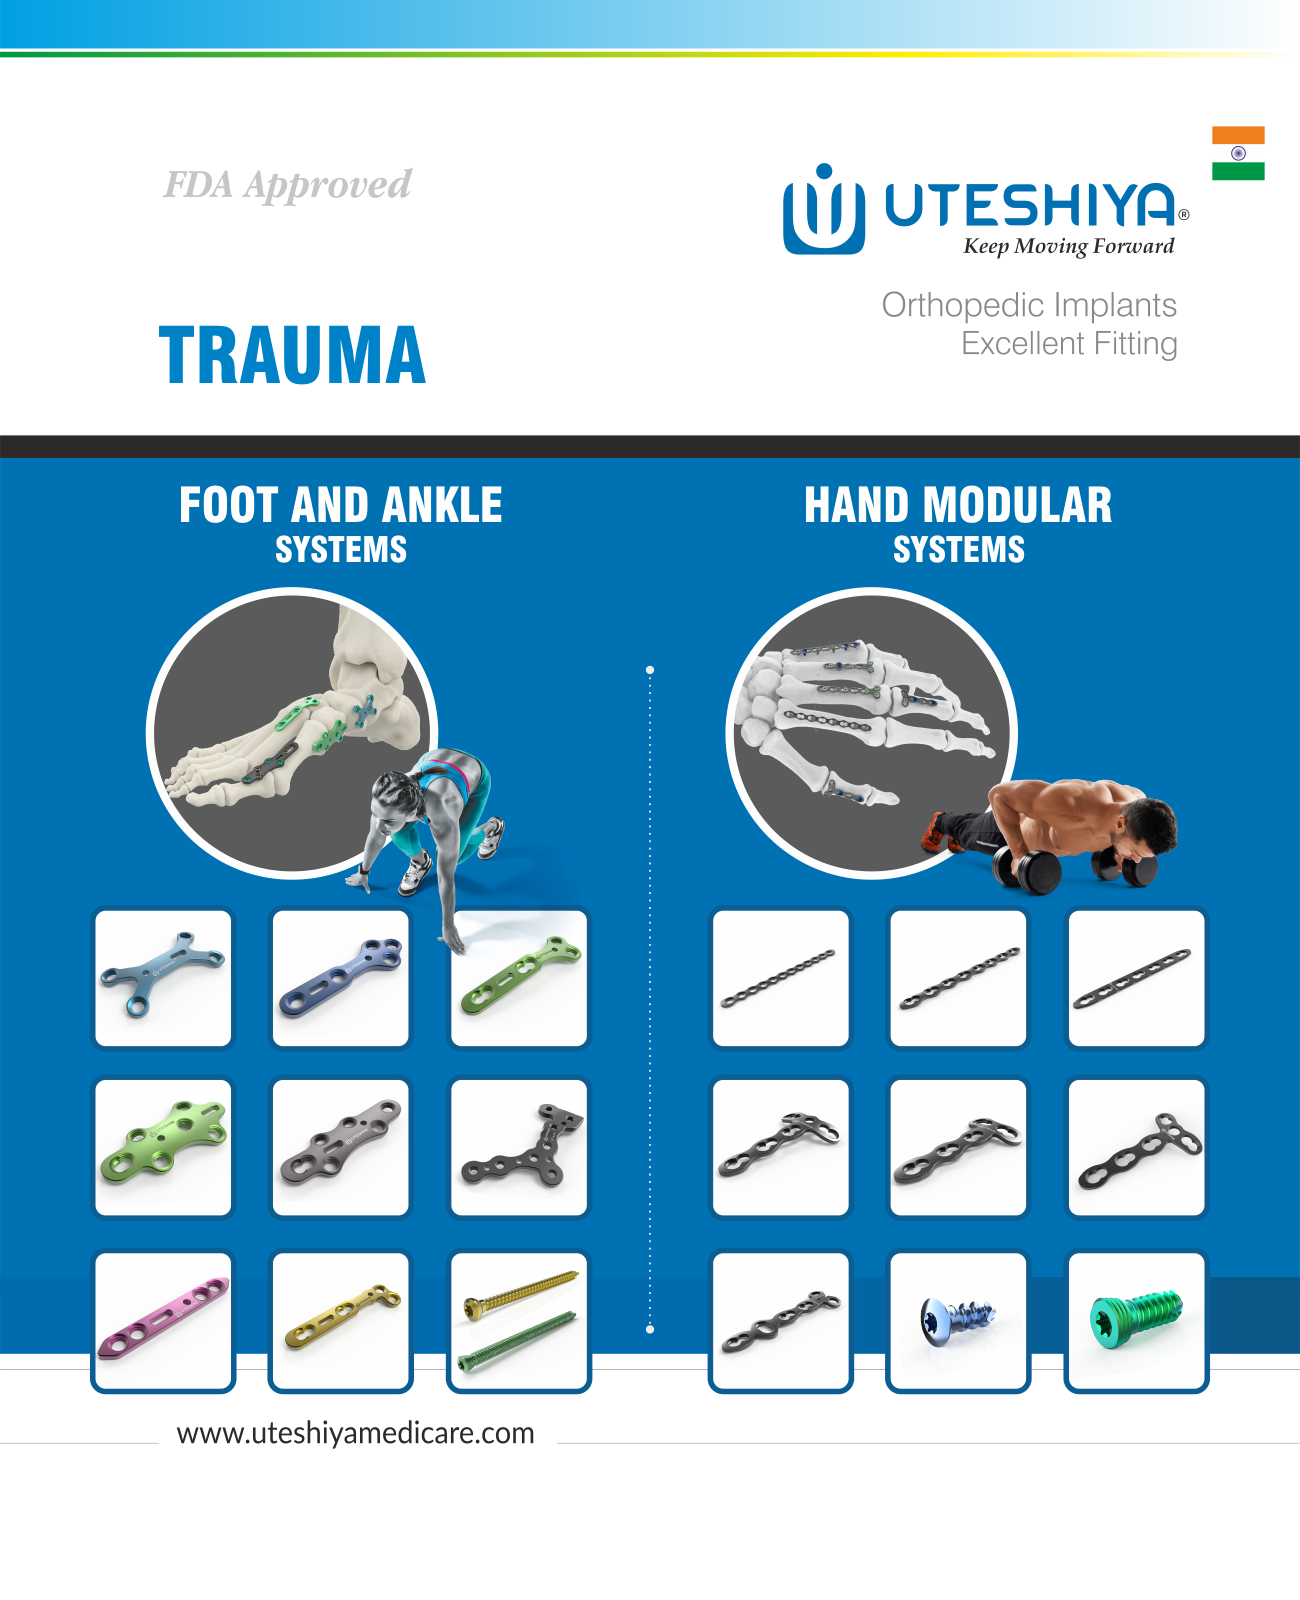 The Complete Guide to Understanding Trauma Implants